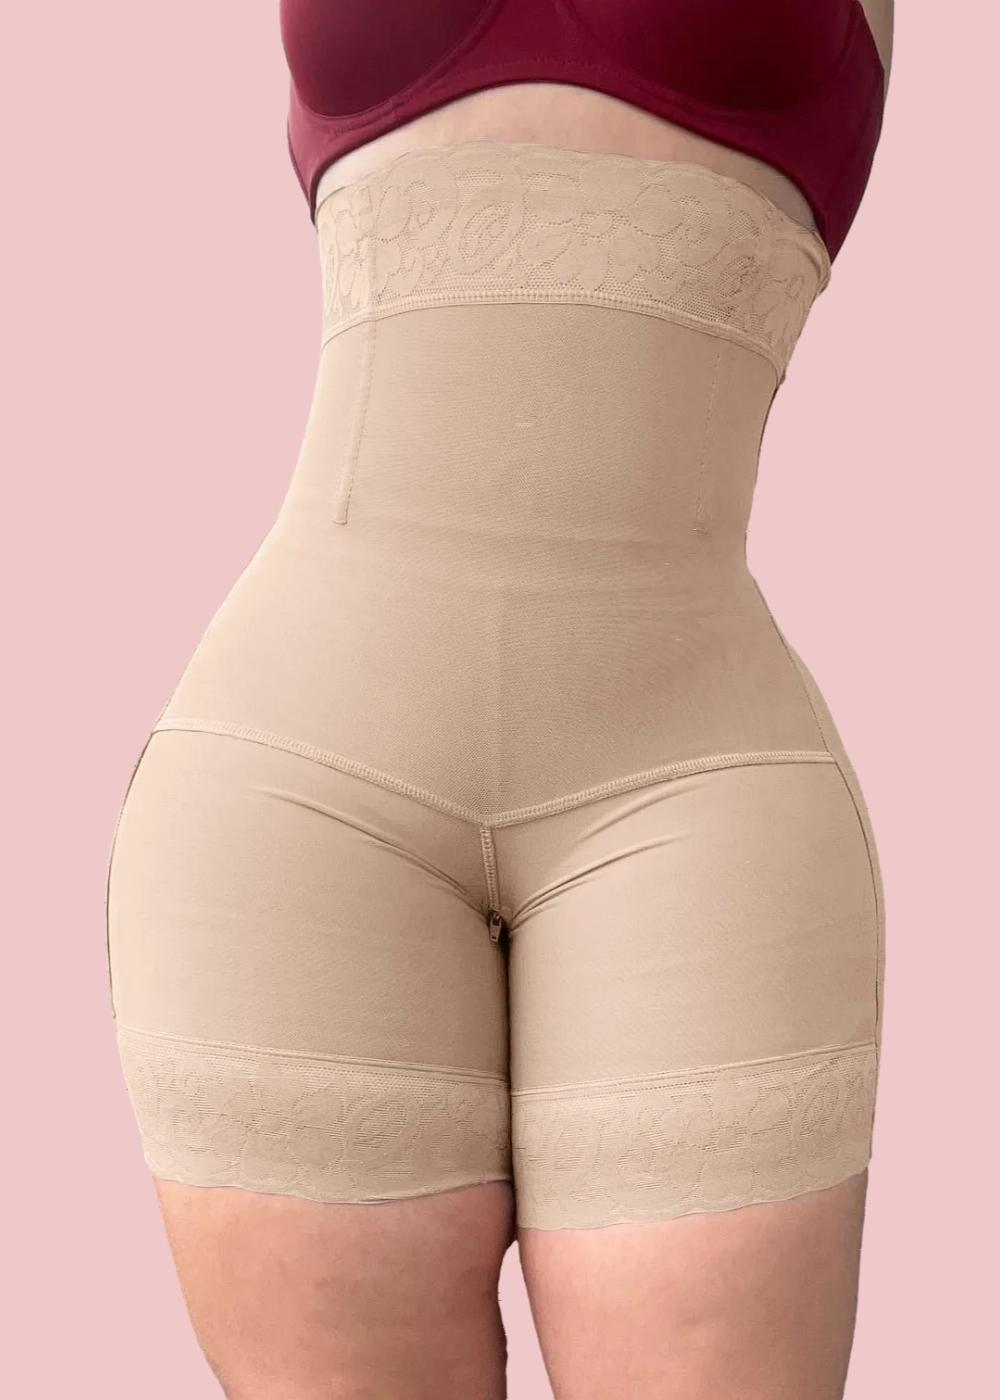 High Waisted Slimming Butt Lifter Control Panty Underwear Shorts